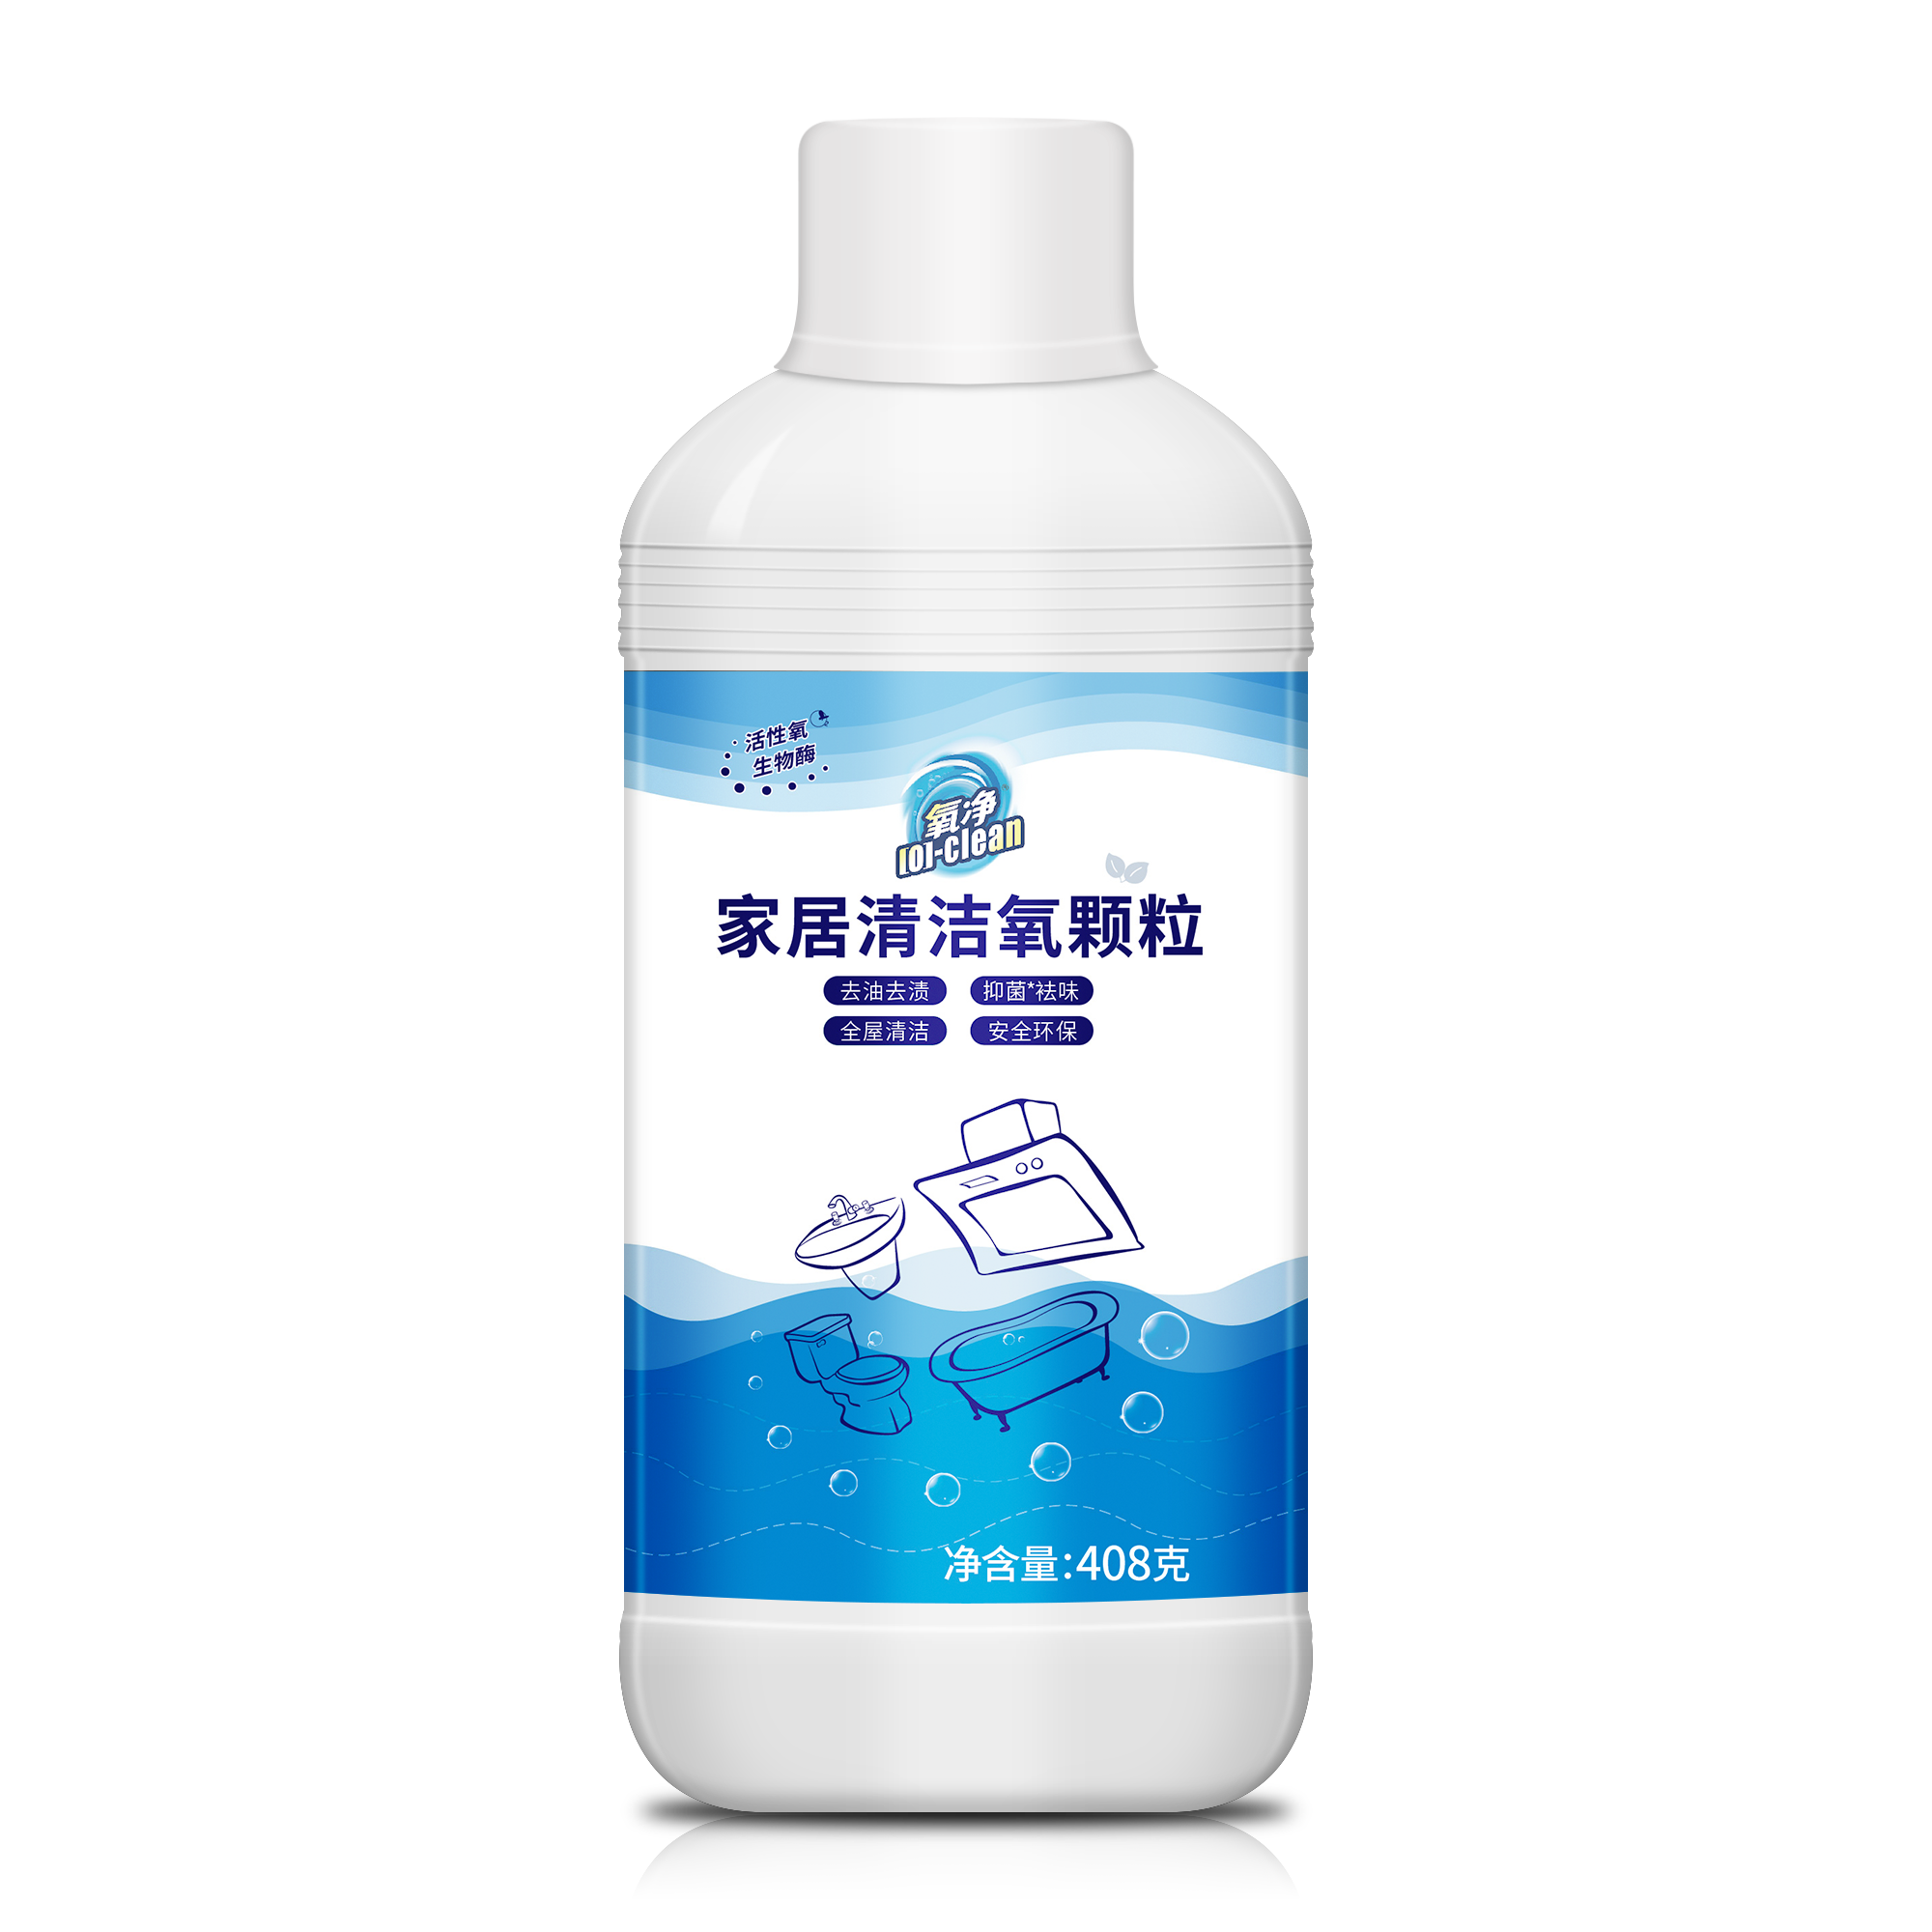 O Clean non-toxic coffee pot cleaner/microwave cleaner Remove oil and stains Antibacterial and deodorizing Safe and environmentally friendly image